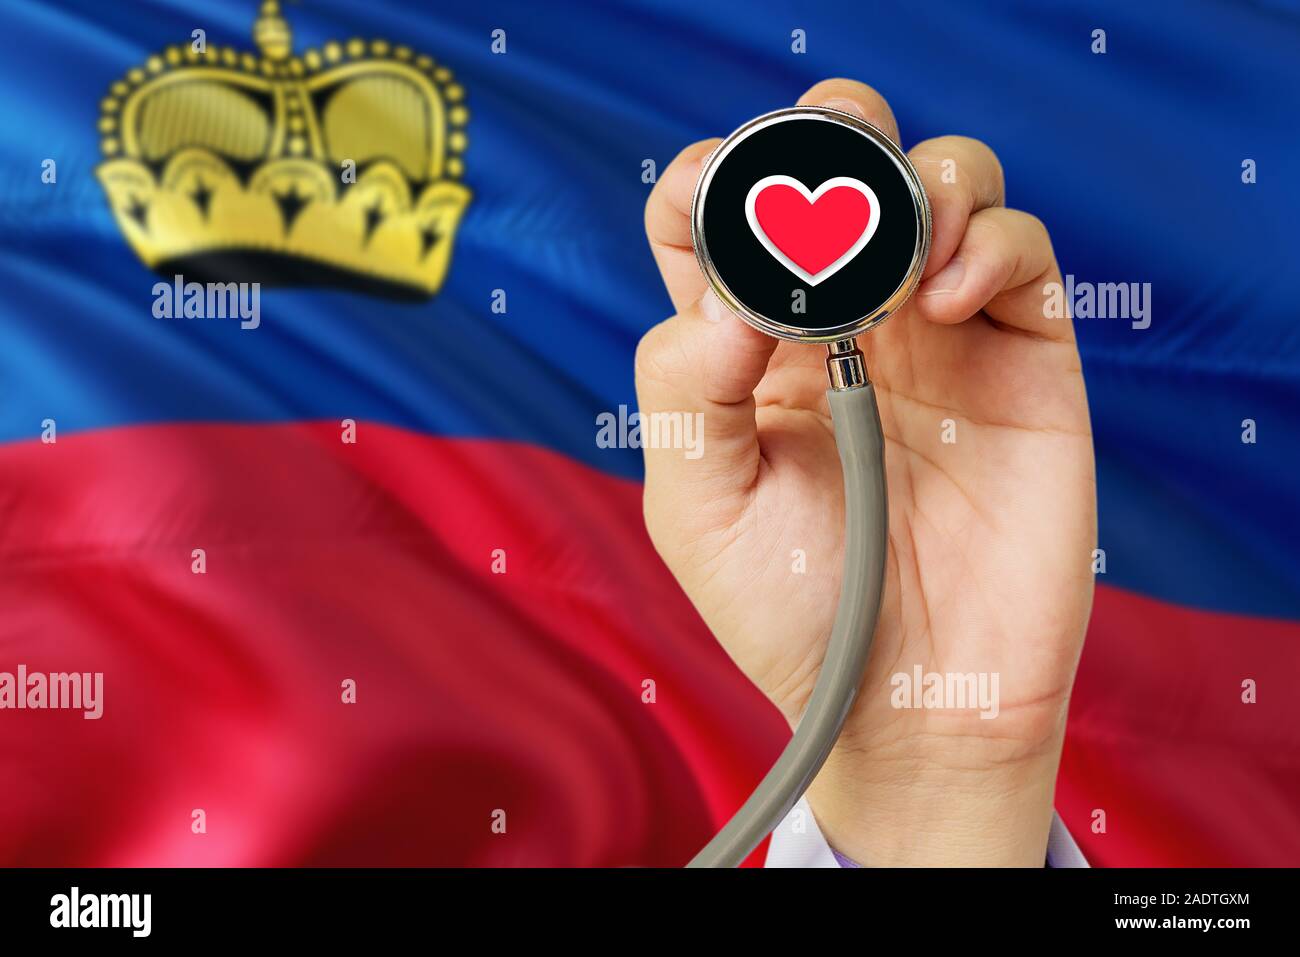 Doctor holding stethoscope with red love heart. National Liechtenstein flag background. Healthcare system concept, medical theme. Stock Photo